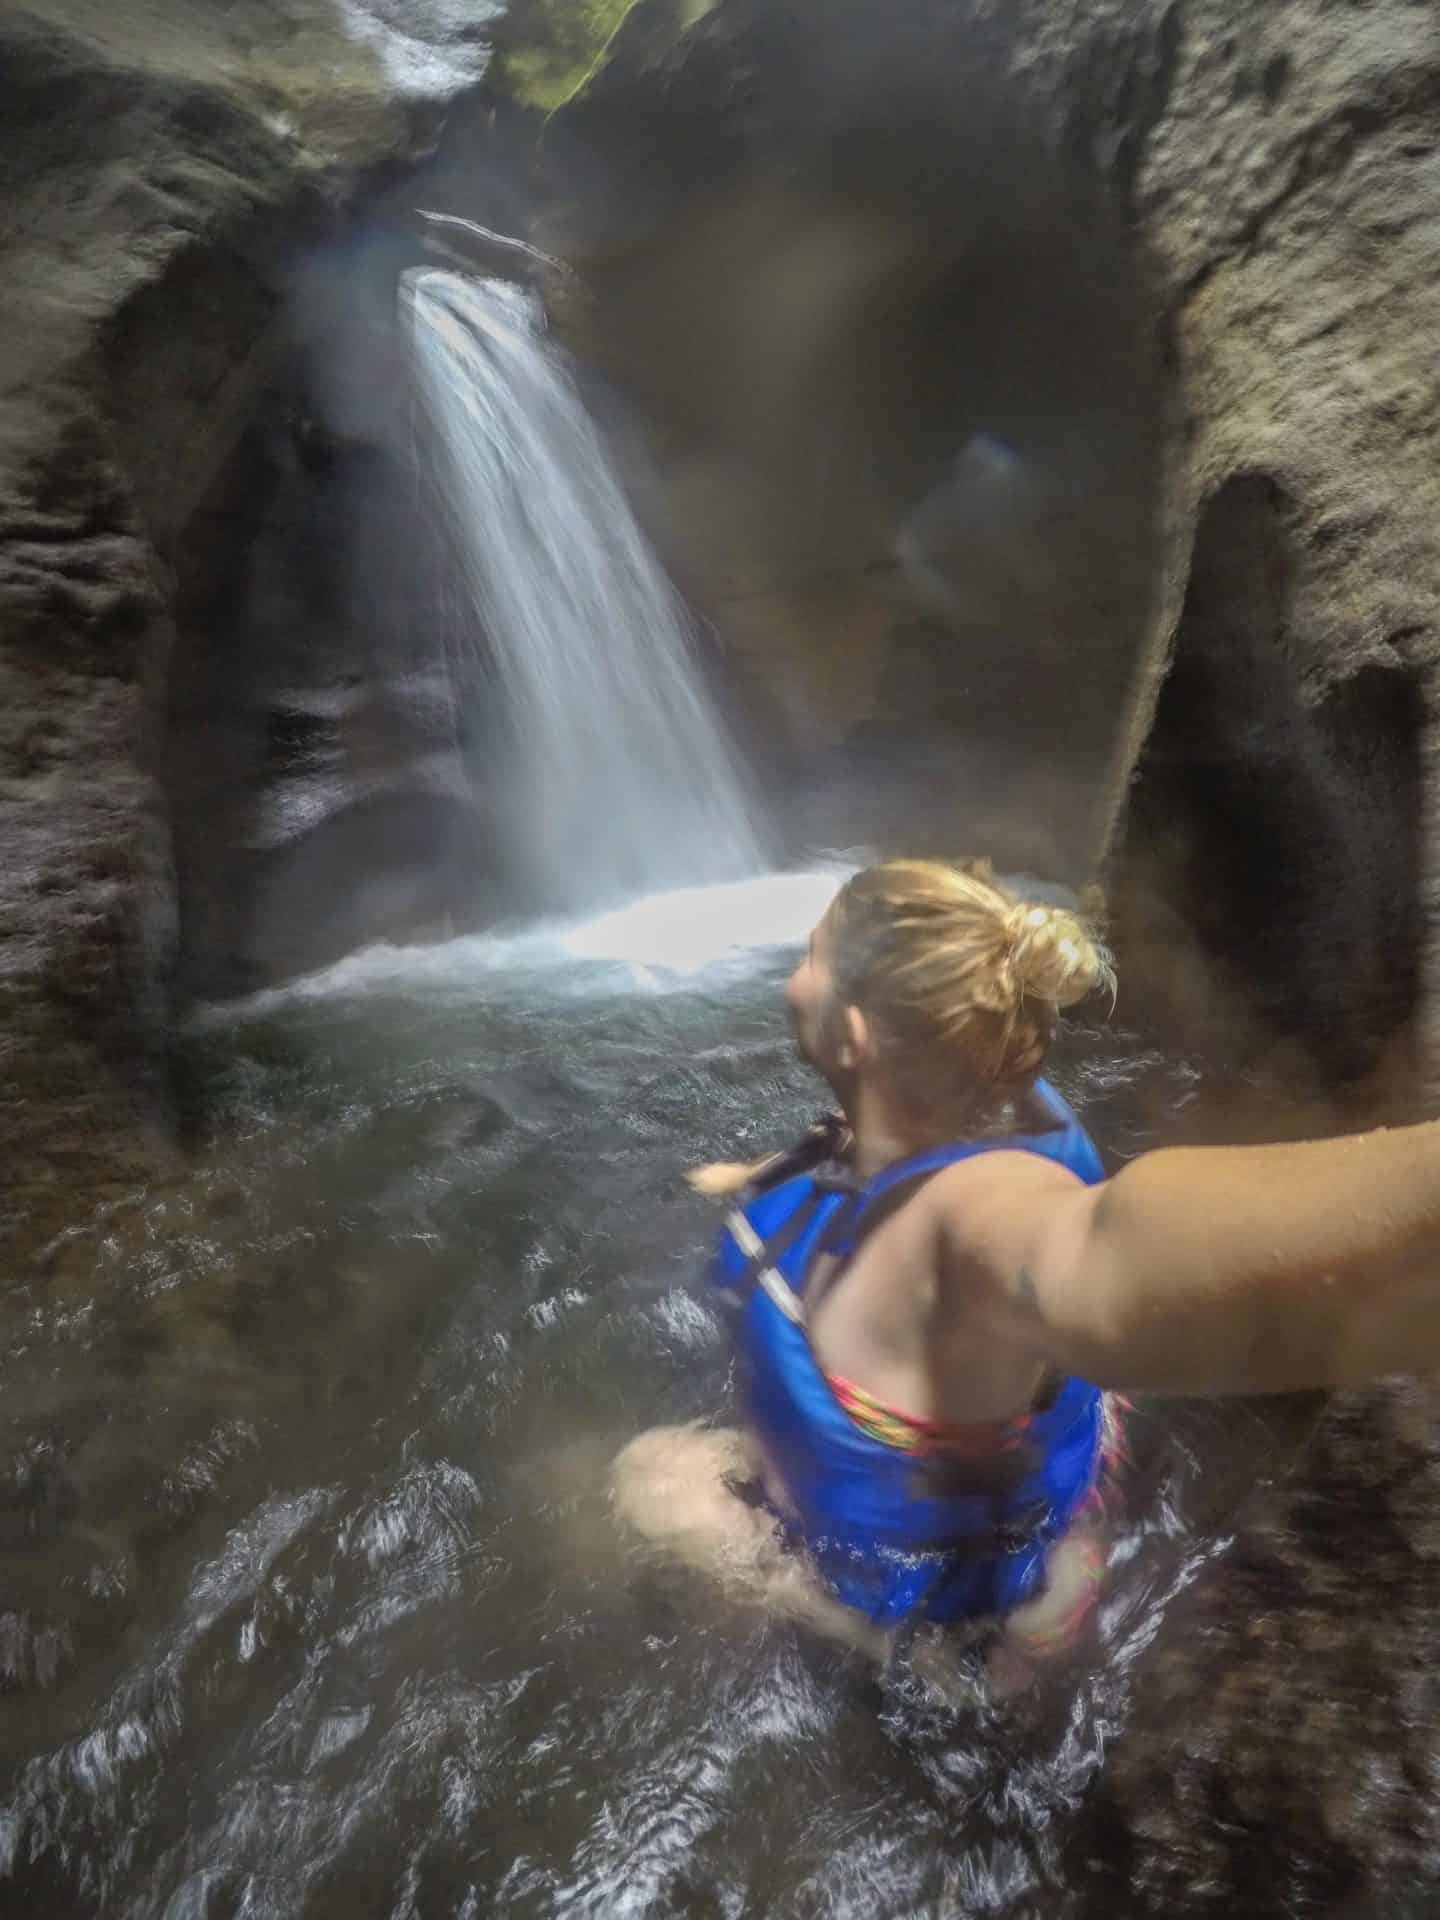 dominica day tours, titou gorge waterfall ellie quinn in blue lifejacket 